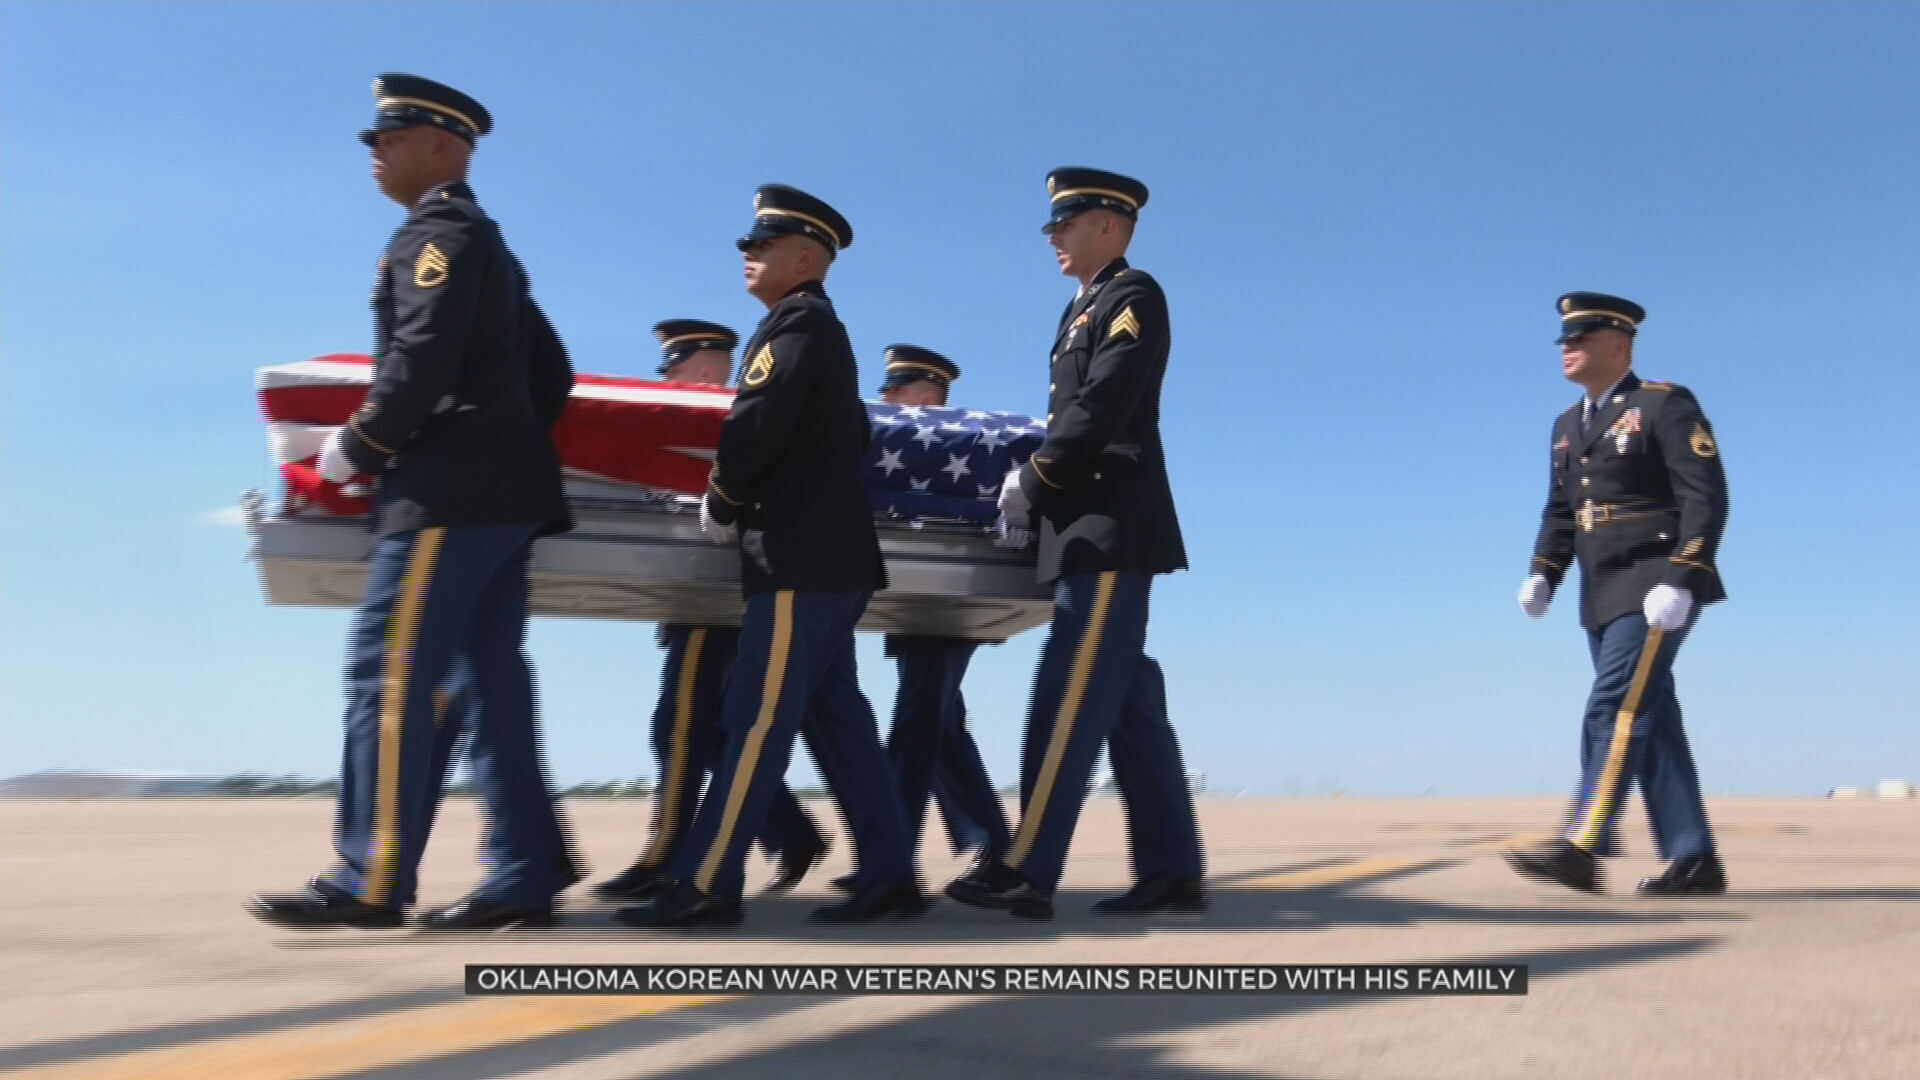 Korean War Veteran’s Remains Returned Home To Oklahoma After 70 Years MIA